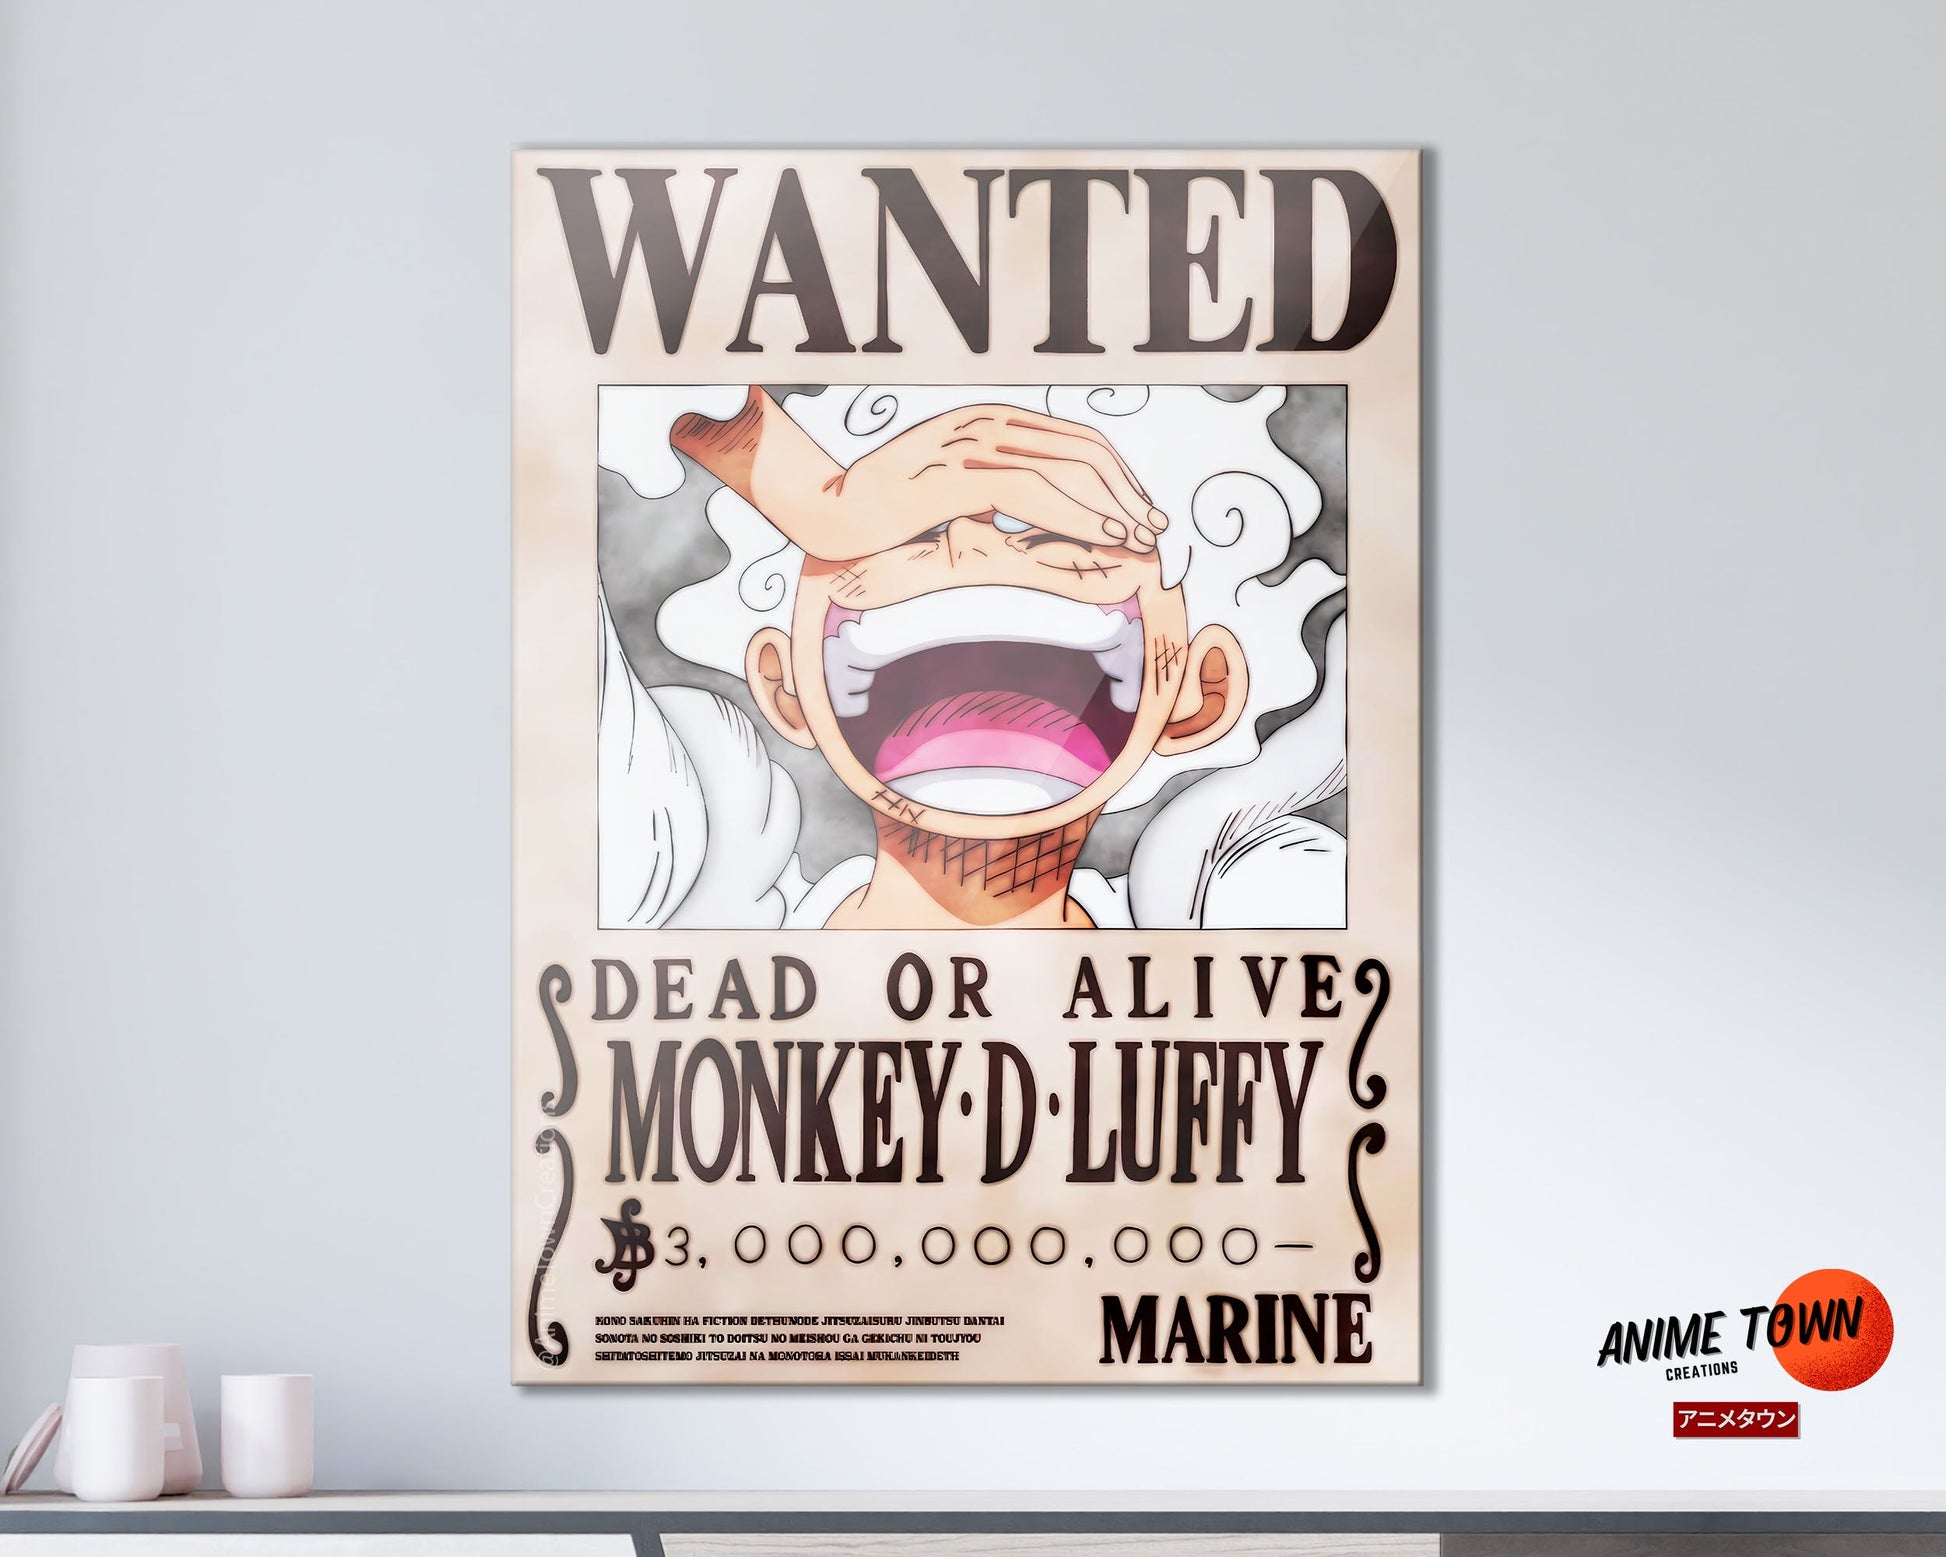 Anime Town Creations Metal Poster One Piece Luffy Gear 5 Wanted 11" x 17" Home Goods - Anime One Piece Metal Poster